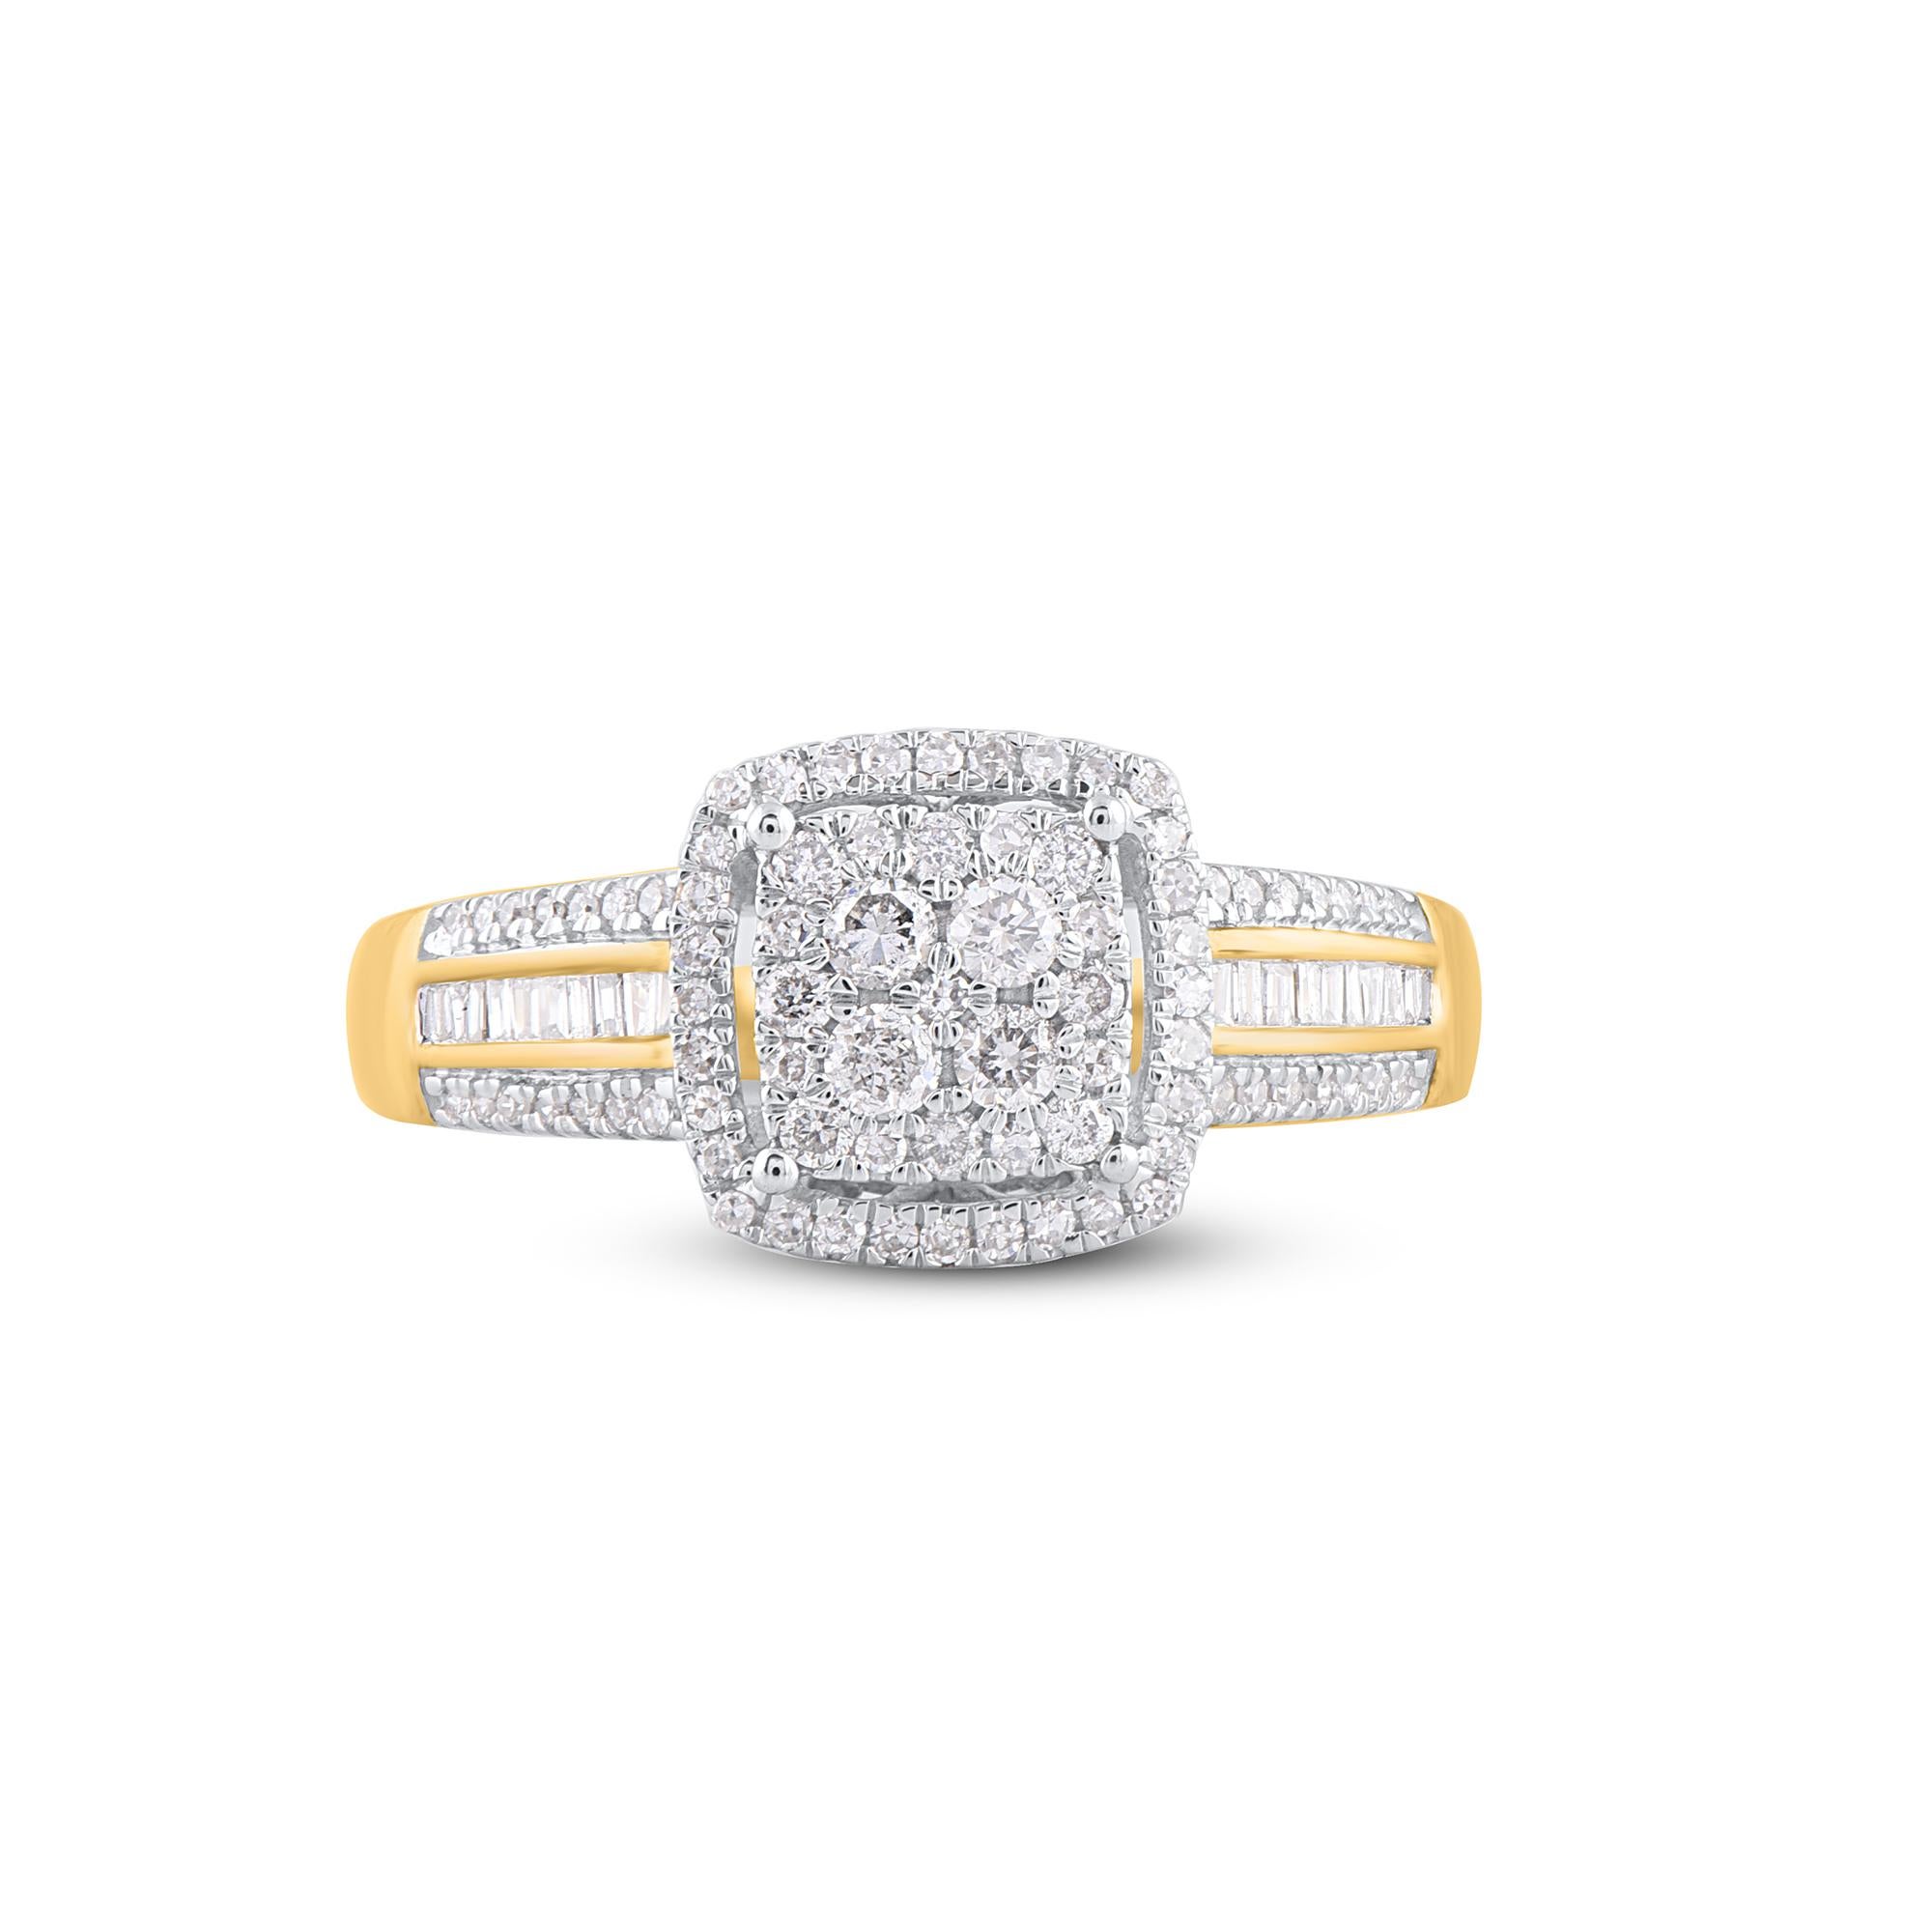 Express your love for her in the most classic way with this engagement ring. Beautifully crafted by our inhouse experts in 14 karat yellow gold and embellished with 97 brilliant cut and single cut round diamond and baguette diamonds set in prong and